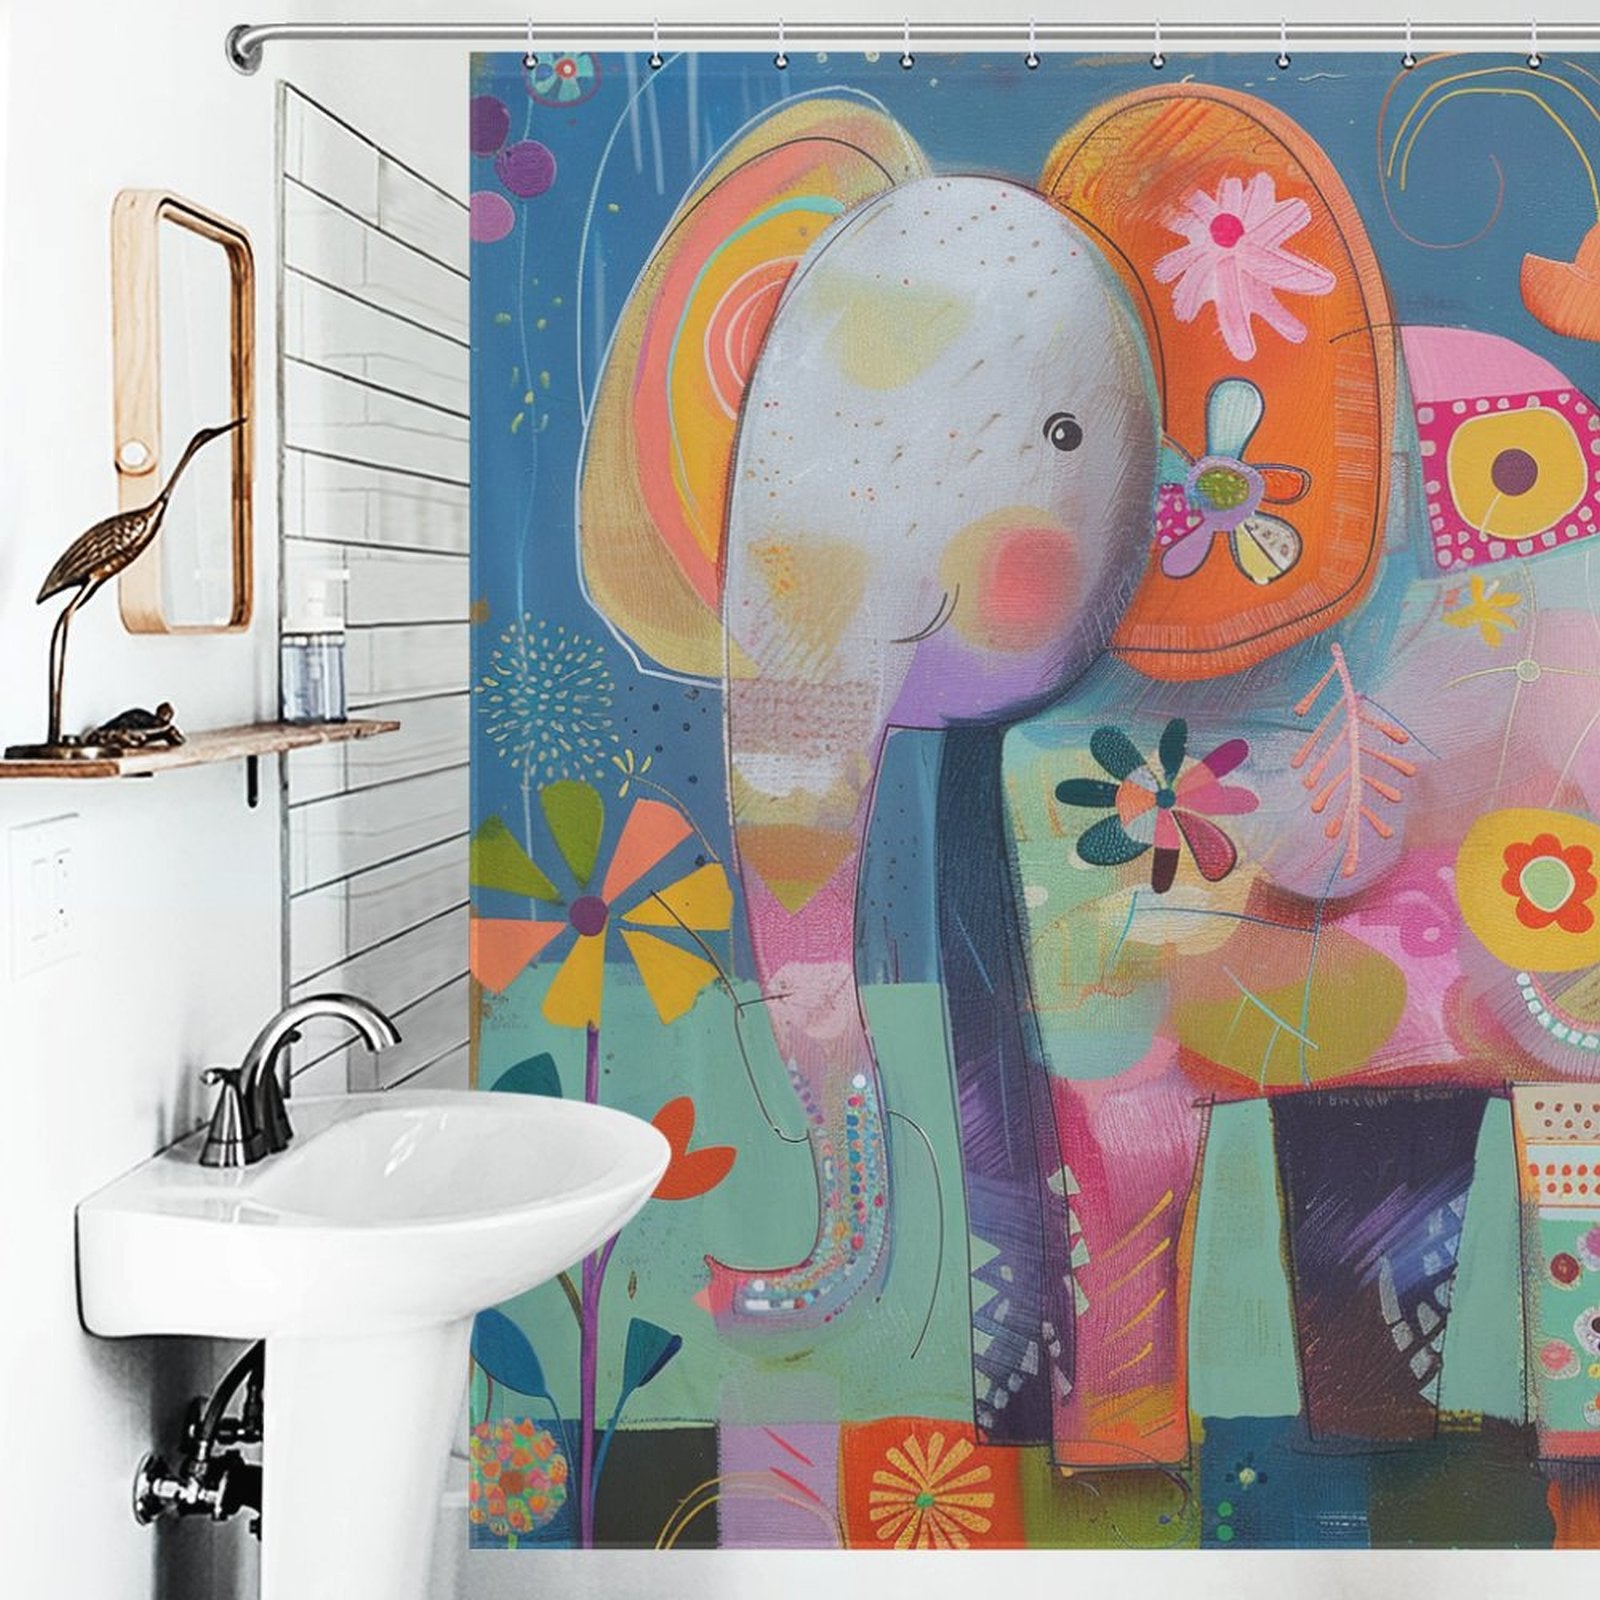 A bathroom with a whimsical, Cute Baby Cartoon Elephant Shower Curtain-Cottoncat by Cotton Cat, a white sink, a mirror with a wooden frame, and a bird-shaped soap dispenser holder creates playful bathroom decor.